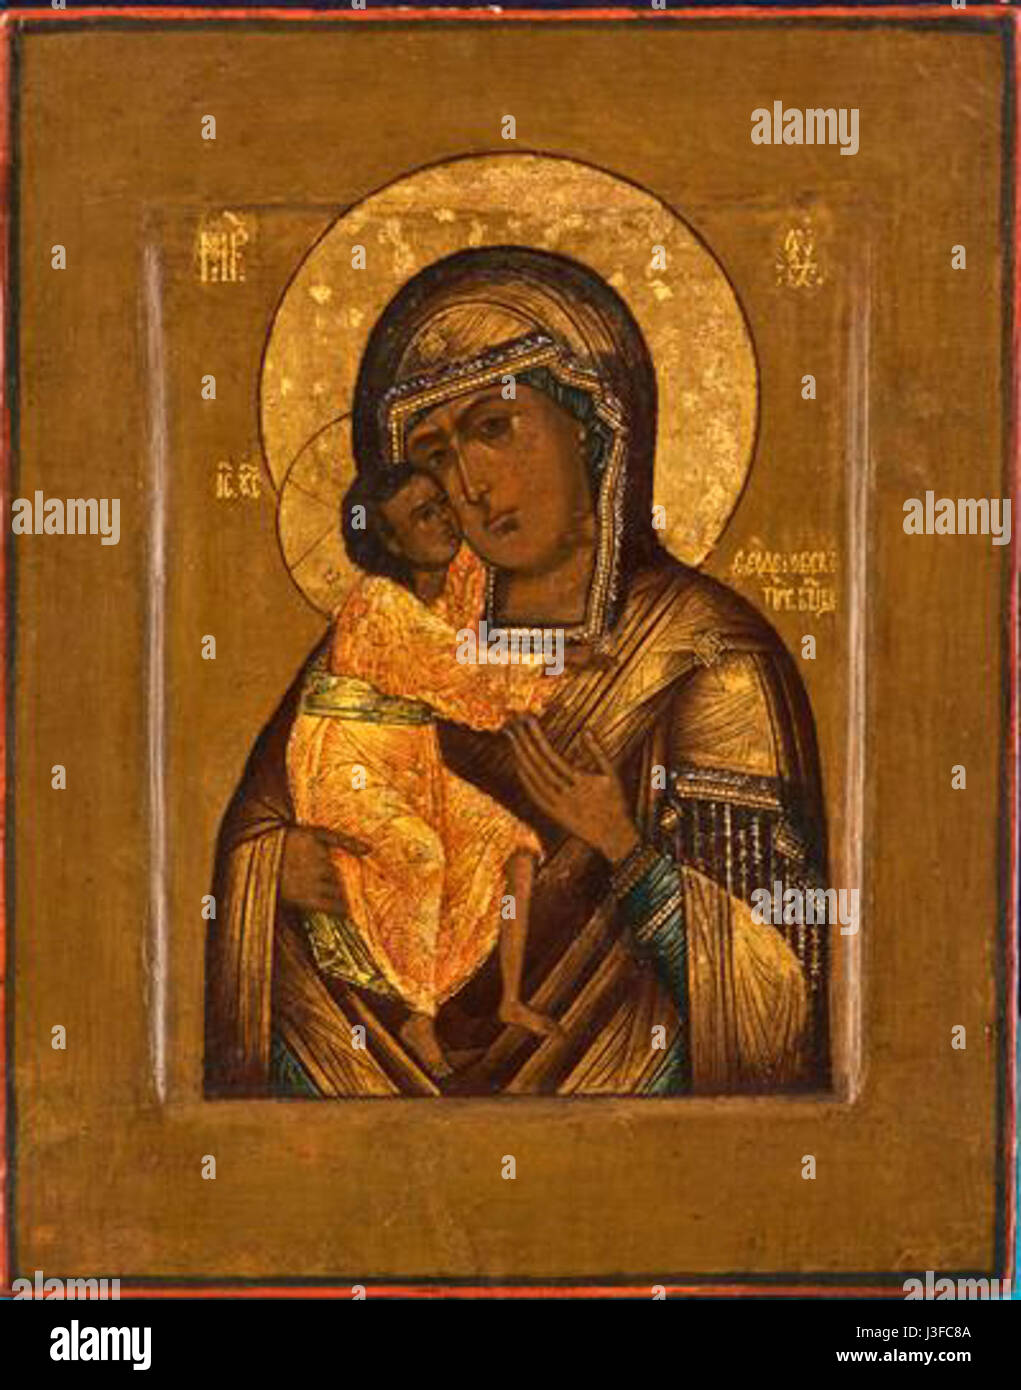 Feodorovskaya in cut back centre portion of the icon panel Stock Photo